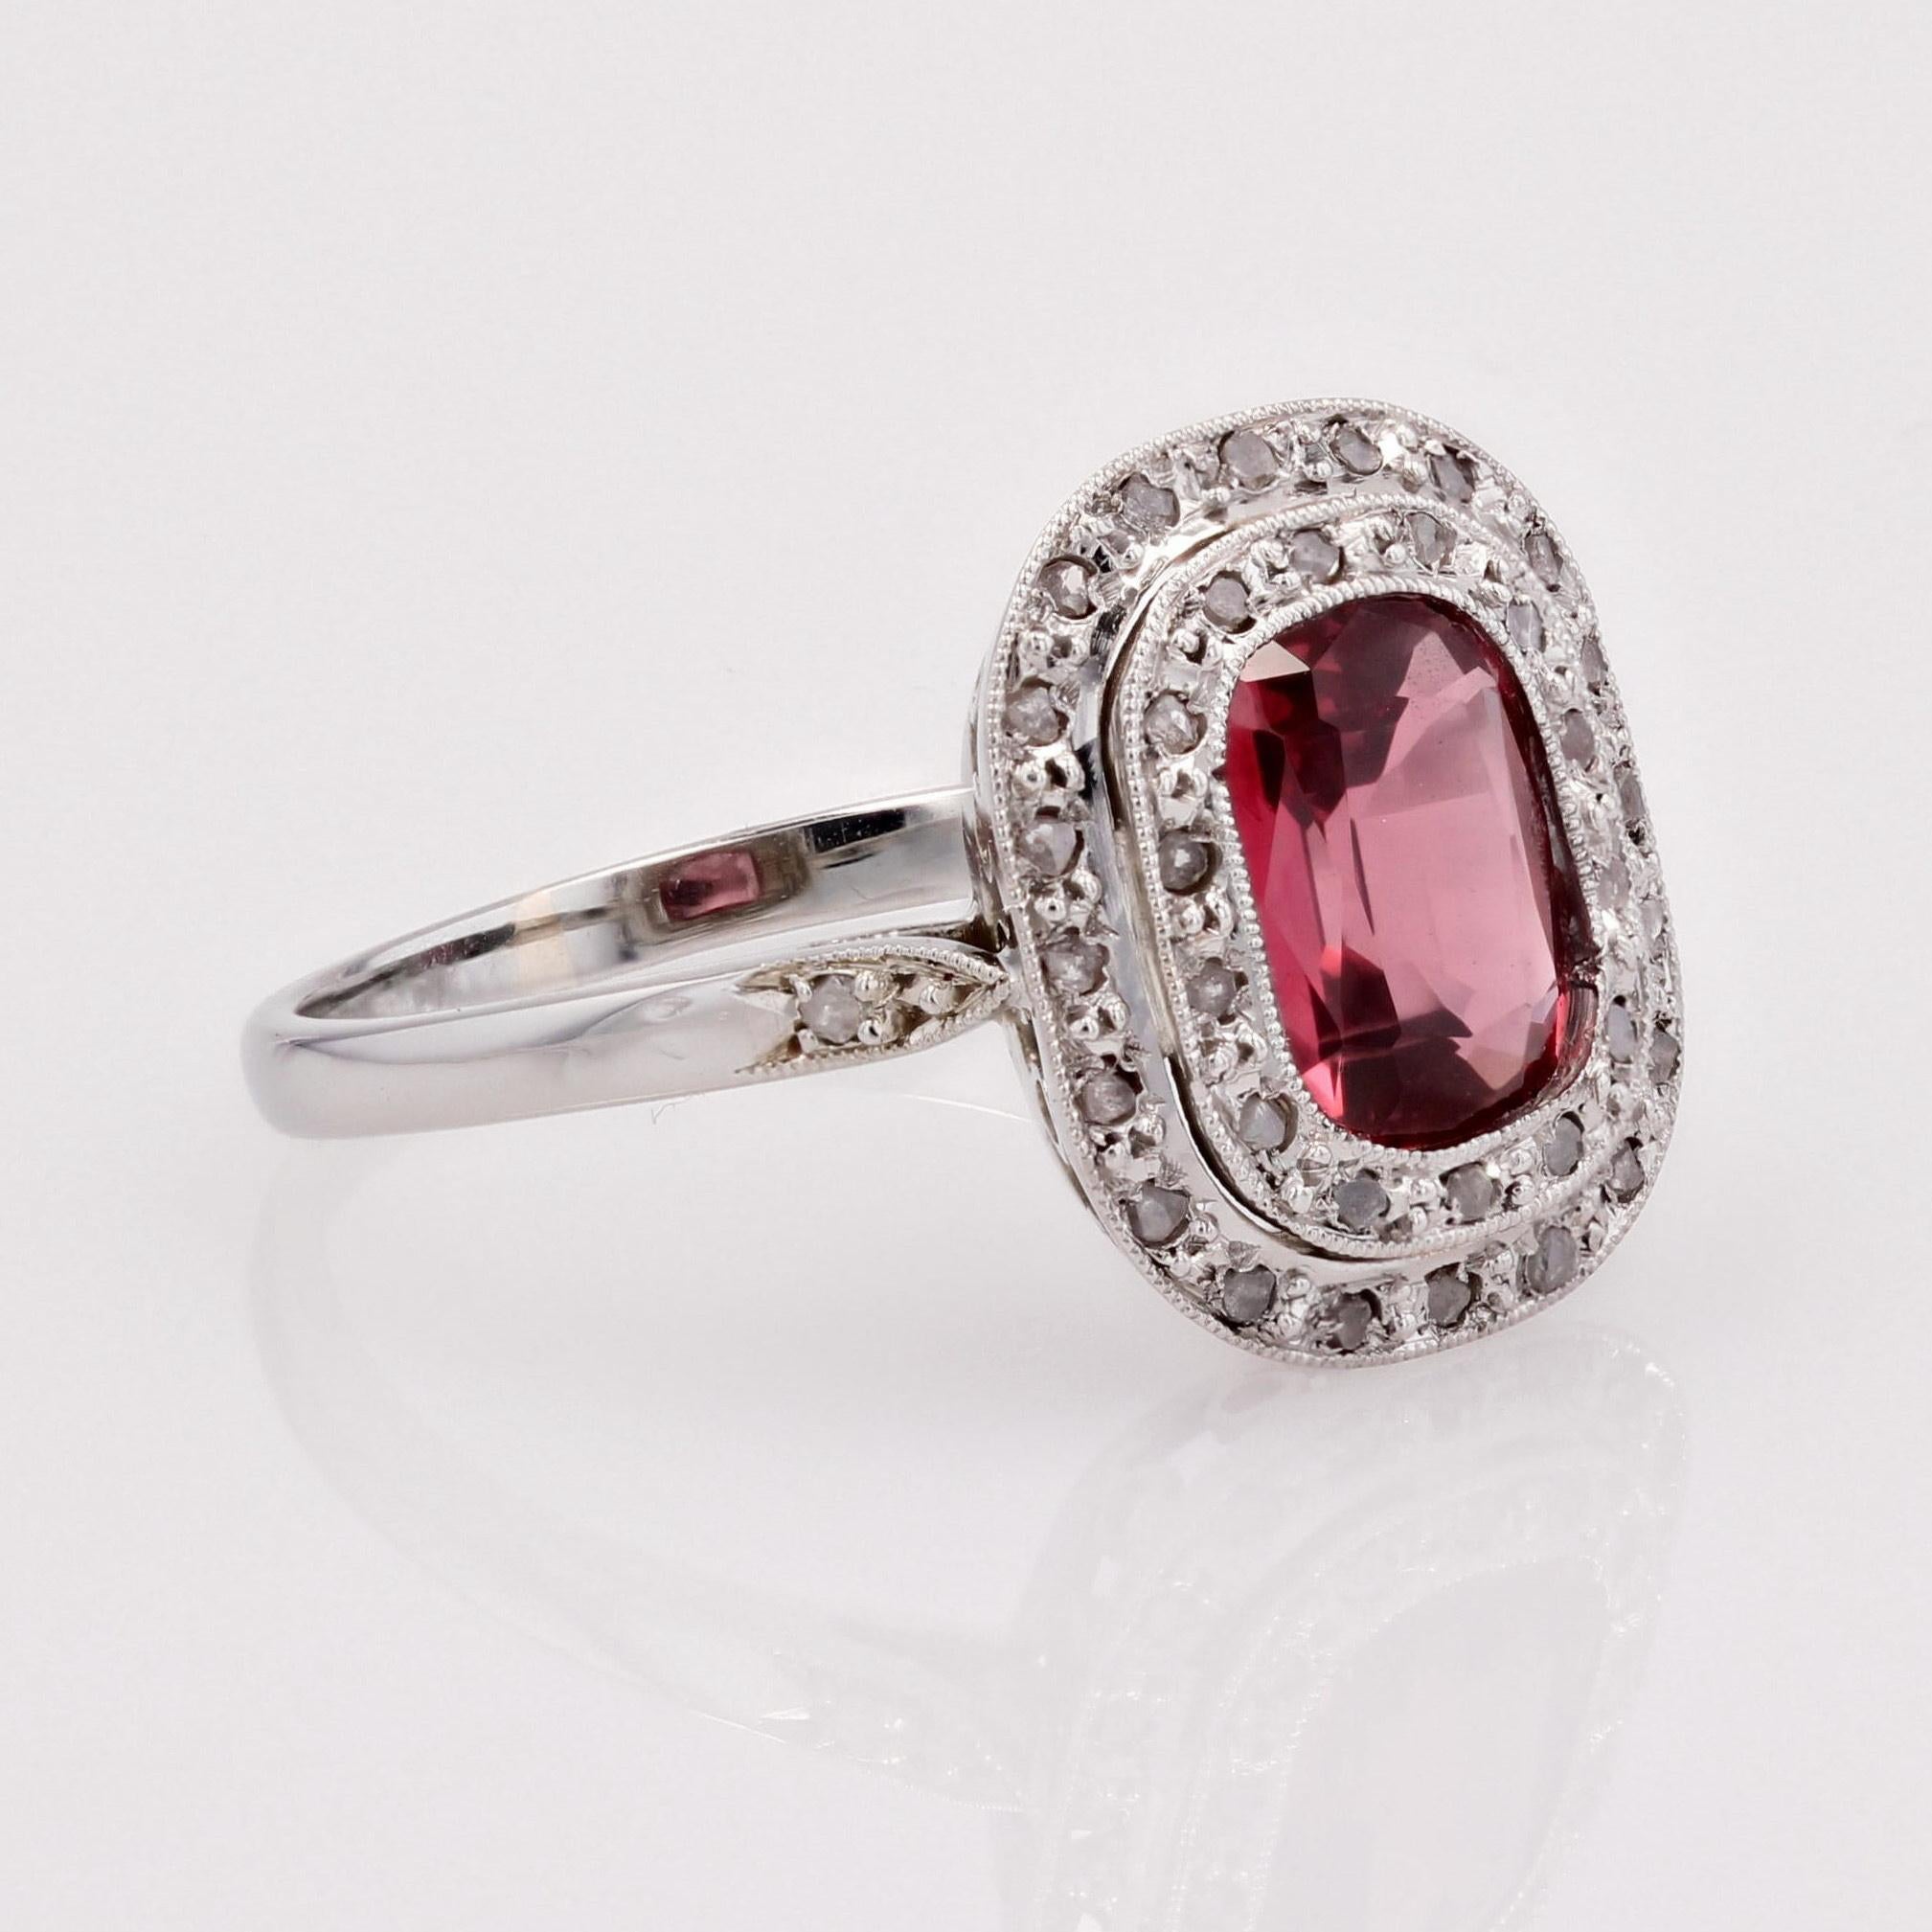 French 1930s 1.20 Carat Red Spinel Diamonds 18 Karat White Gold Ring For Sale 5